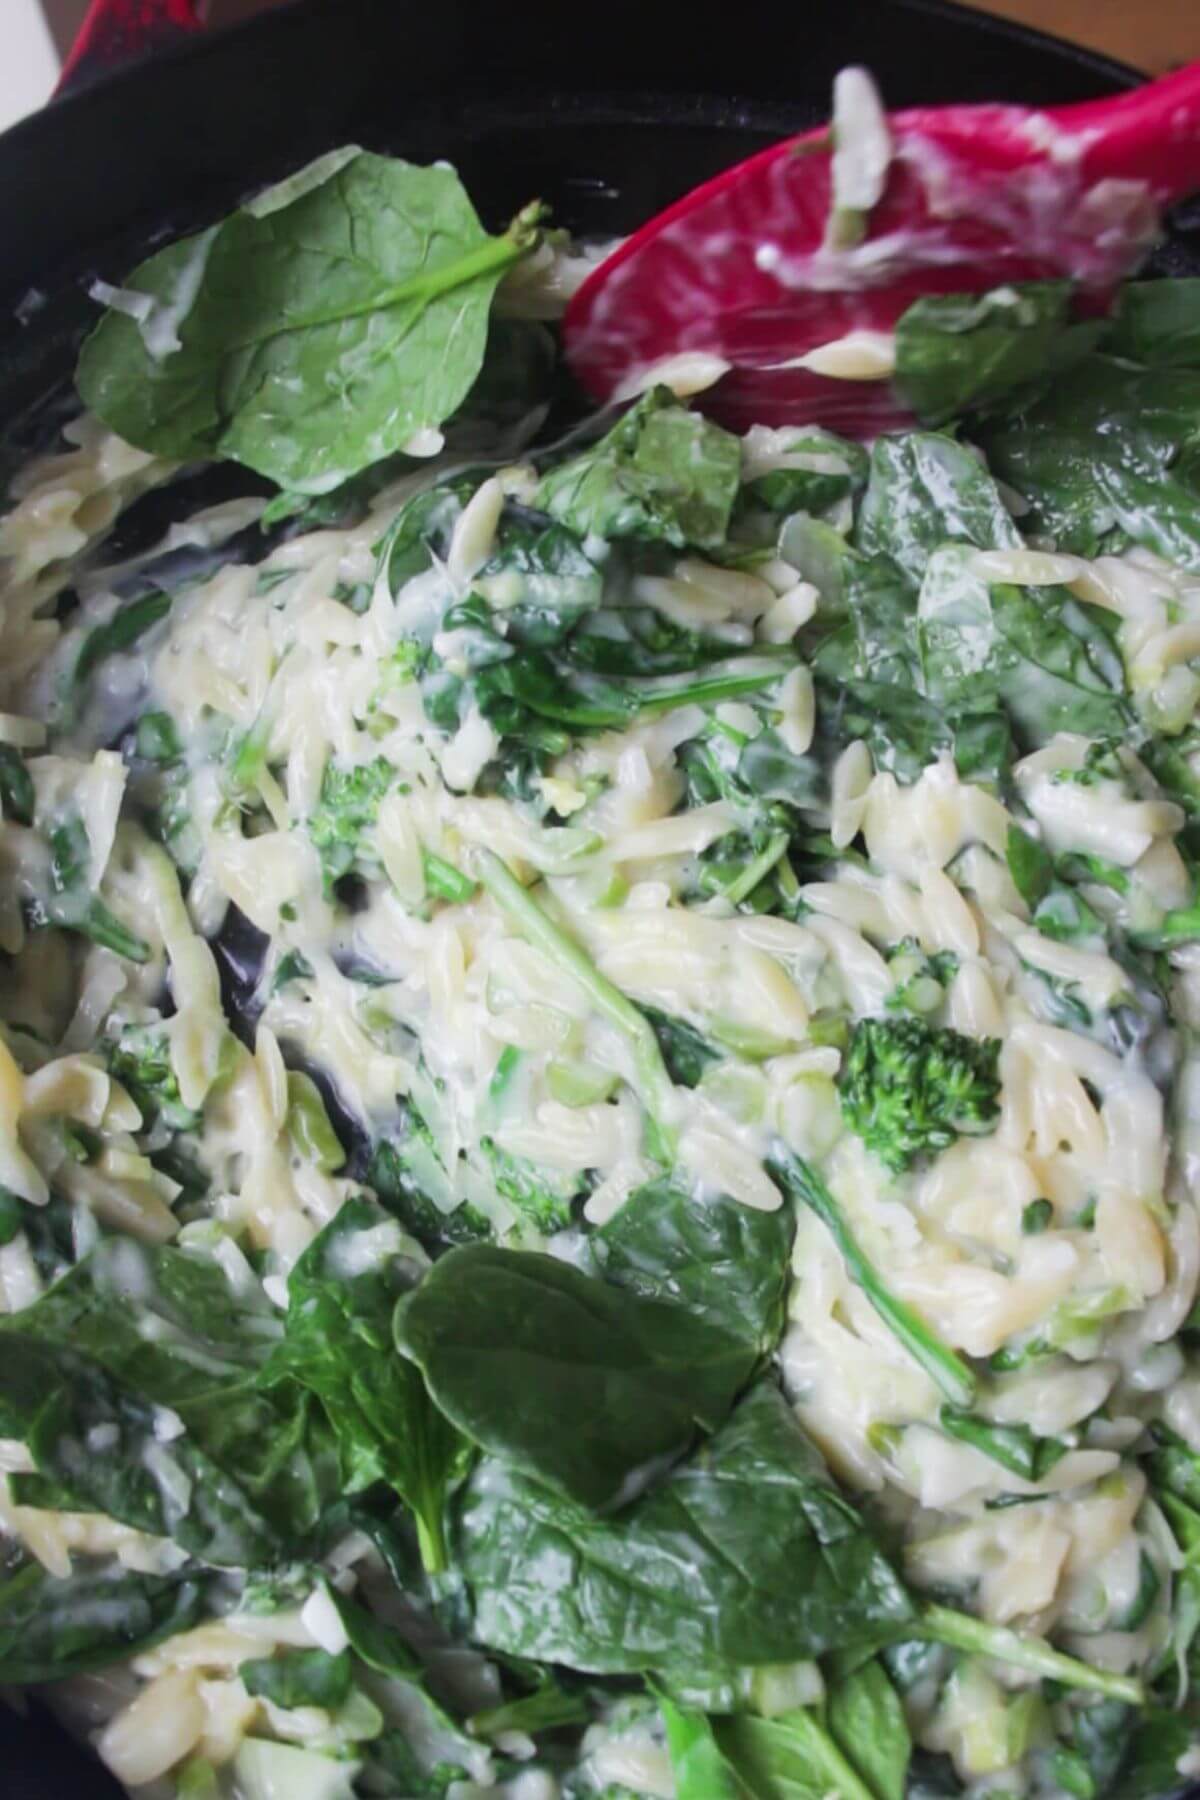 Spinach leaves being folded into creamy orzo with a red spatula.